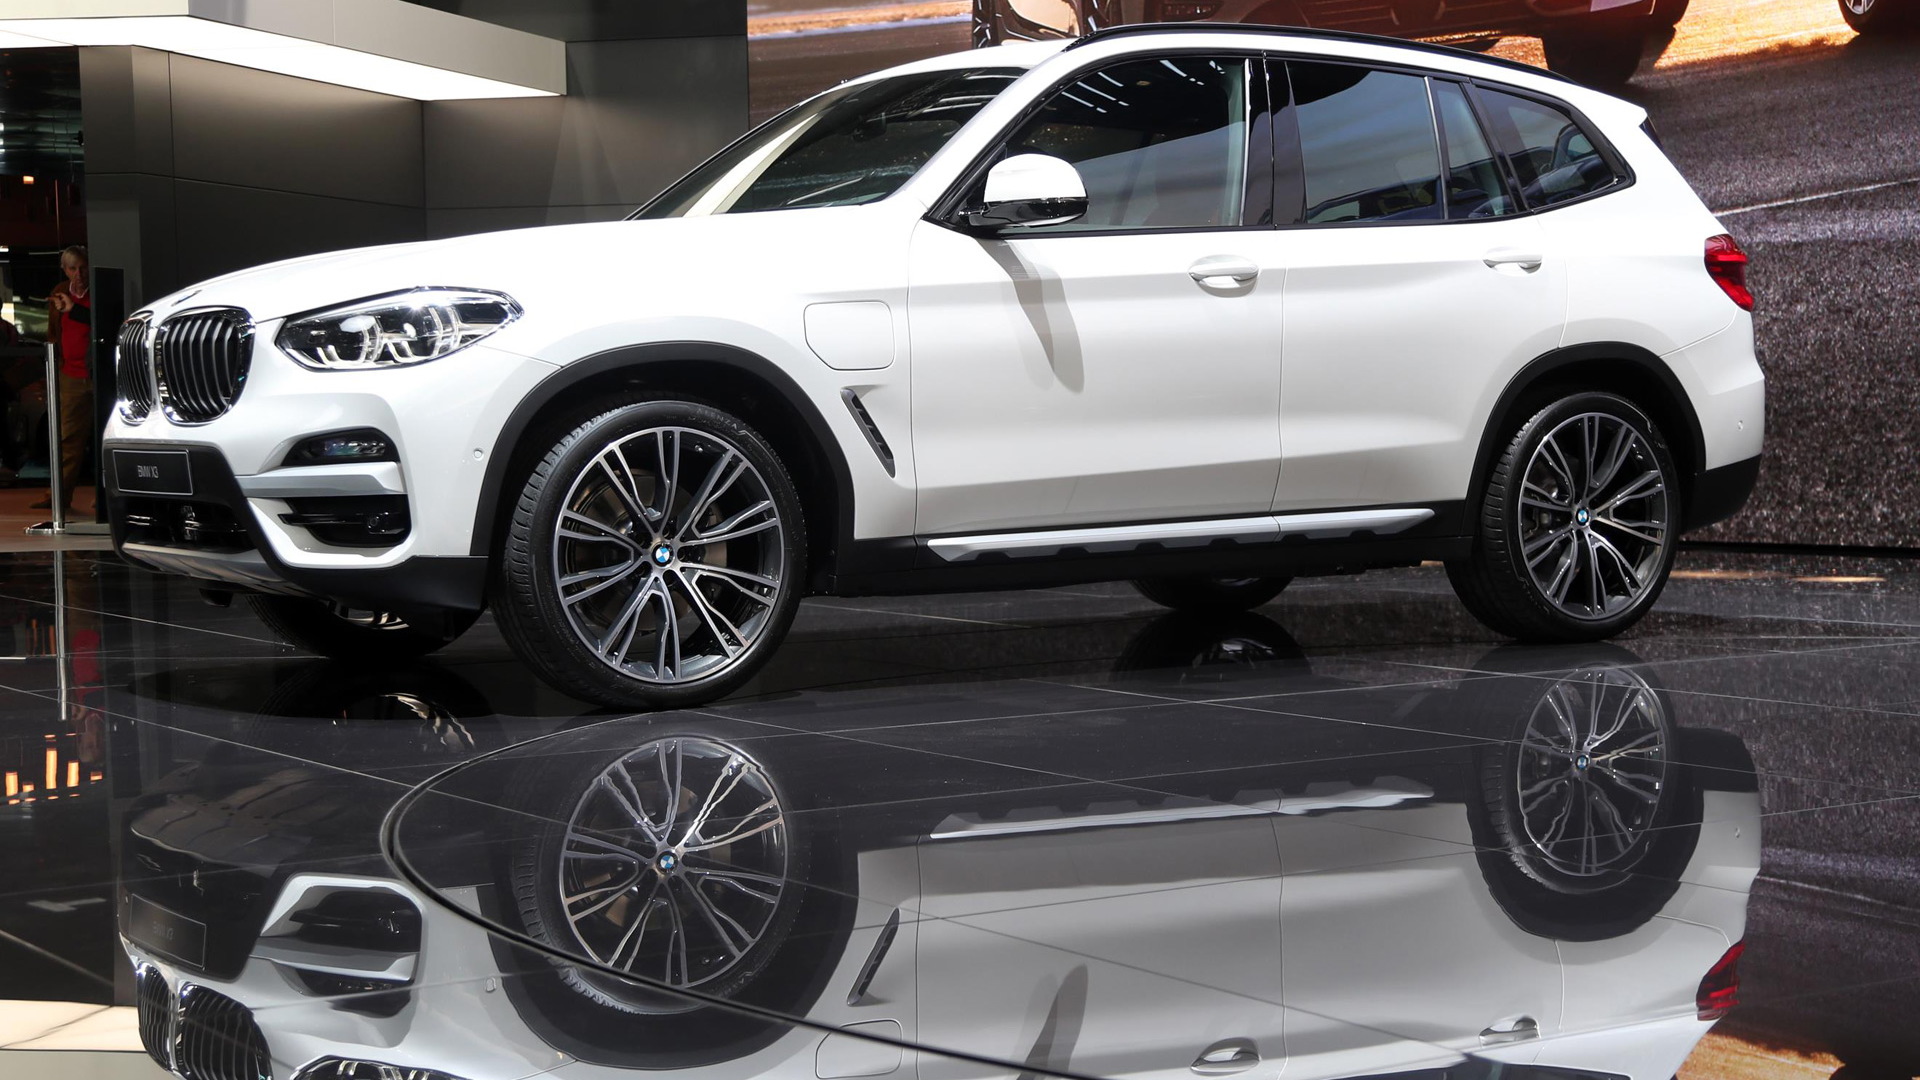 BMW X3 xDrive30e plug-in hybrid due in US in 2020